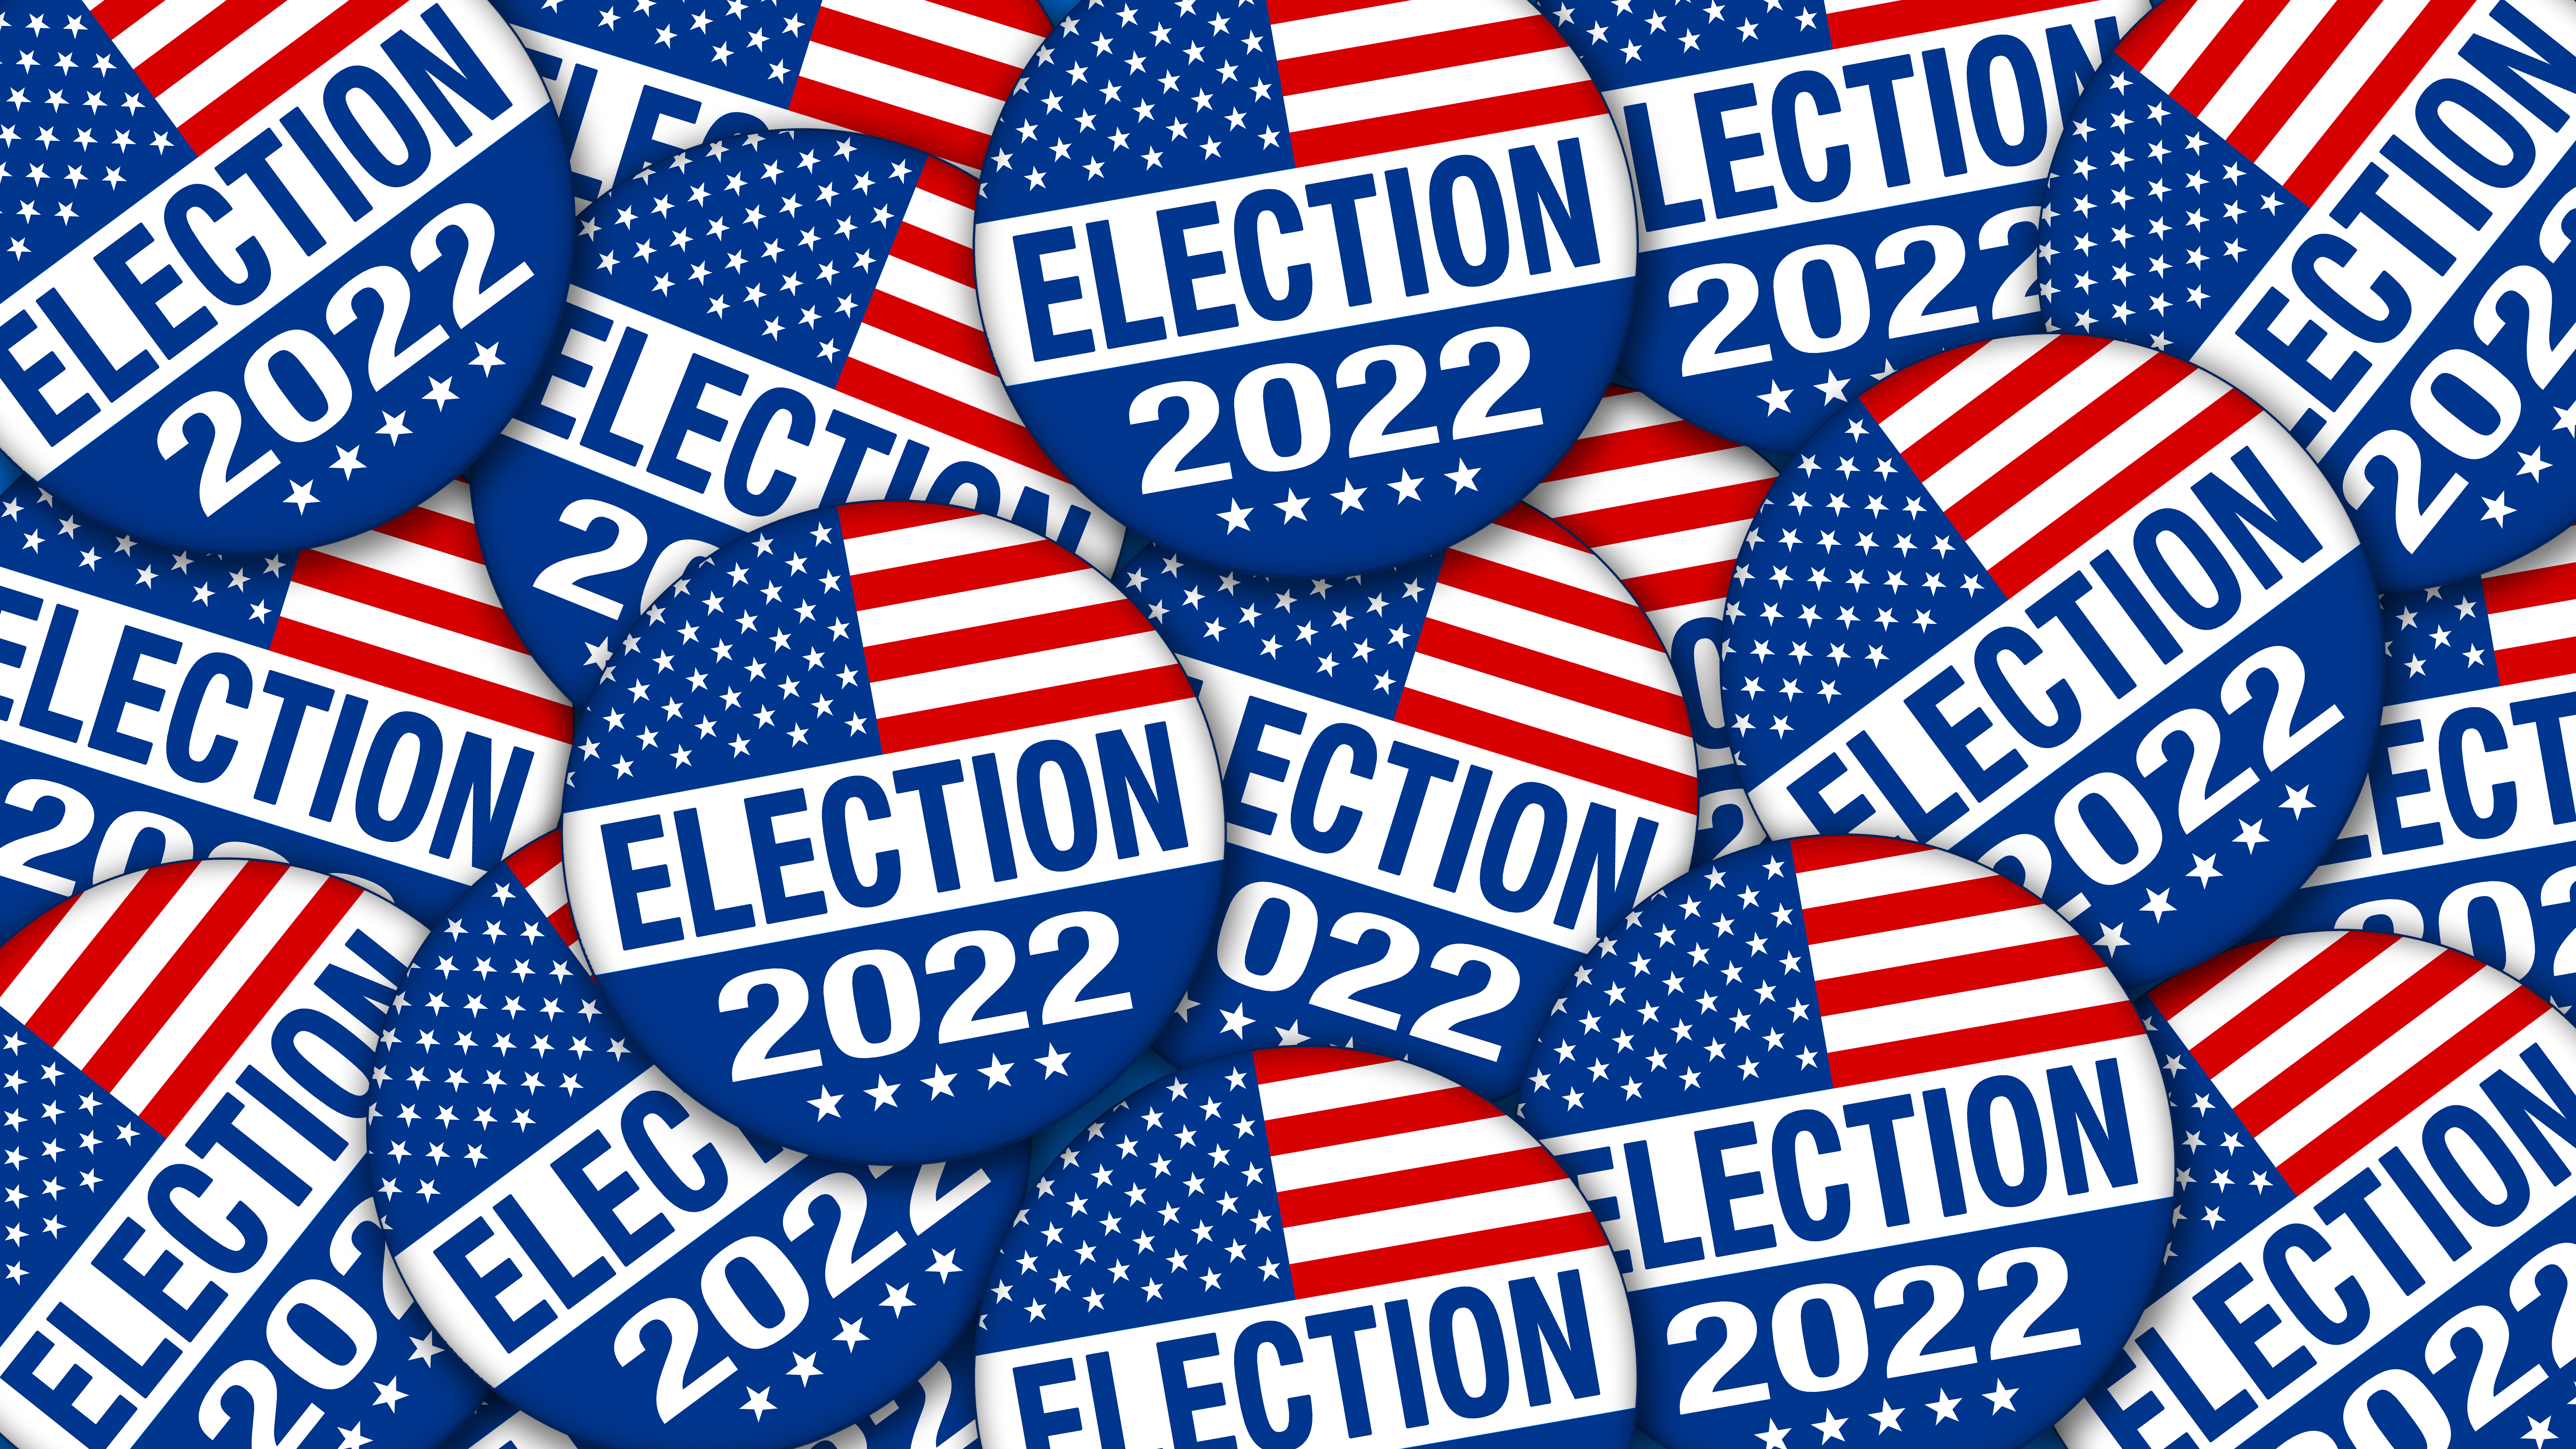 Graphic image of red, white, and blue stickers saying Election 2022.